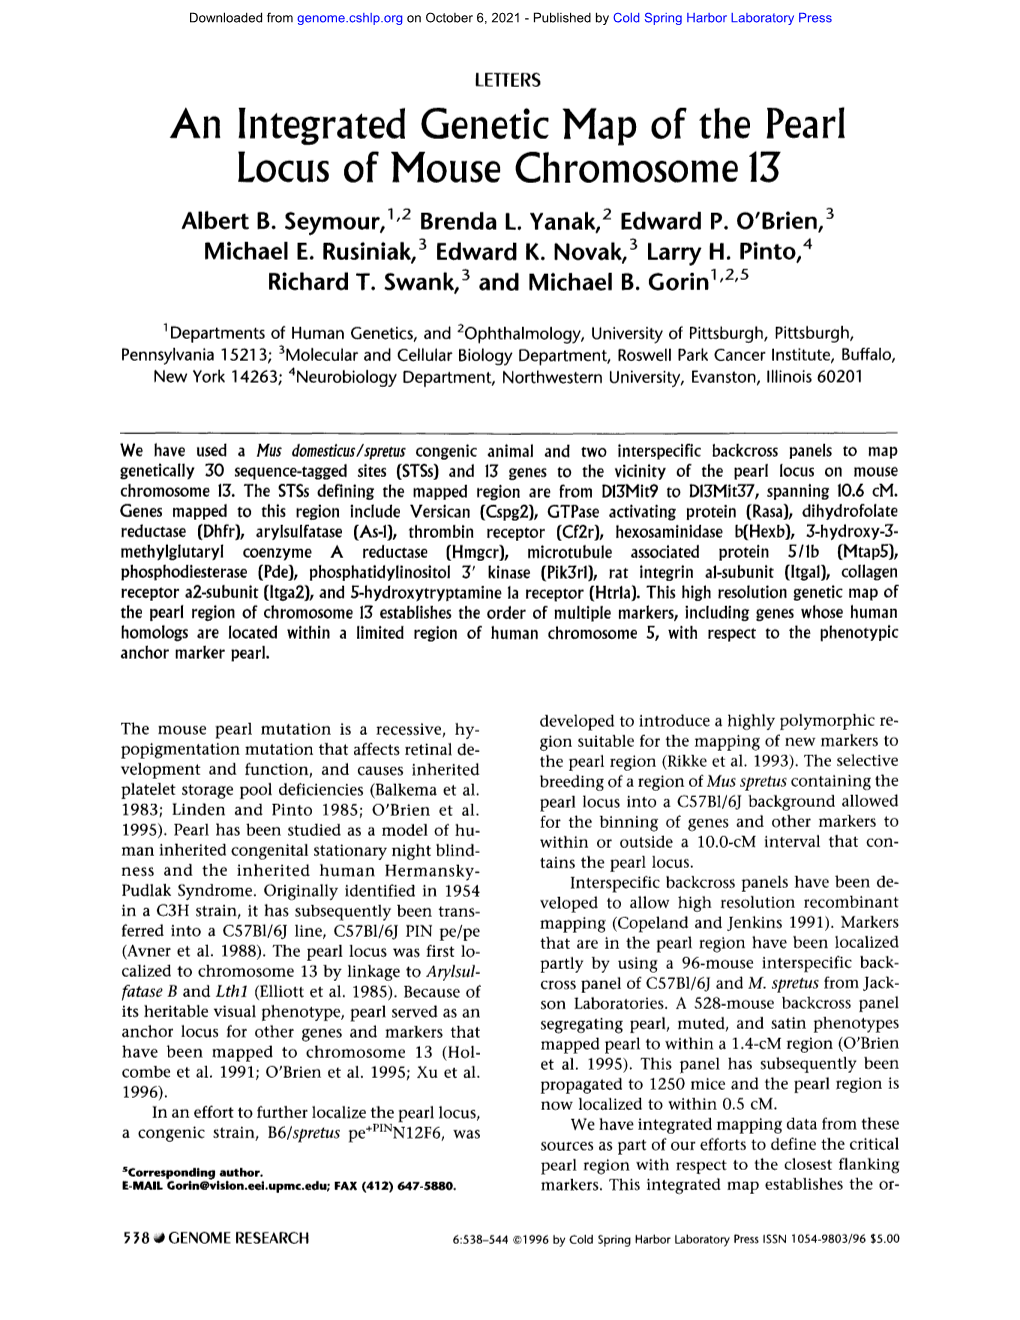 An Integrated Genetic Map of the Pearl Locus of Mouse Chromosome 13 Albert B